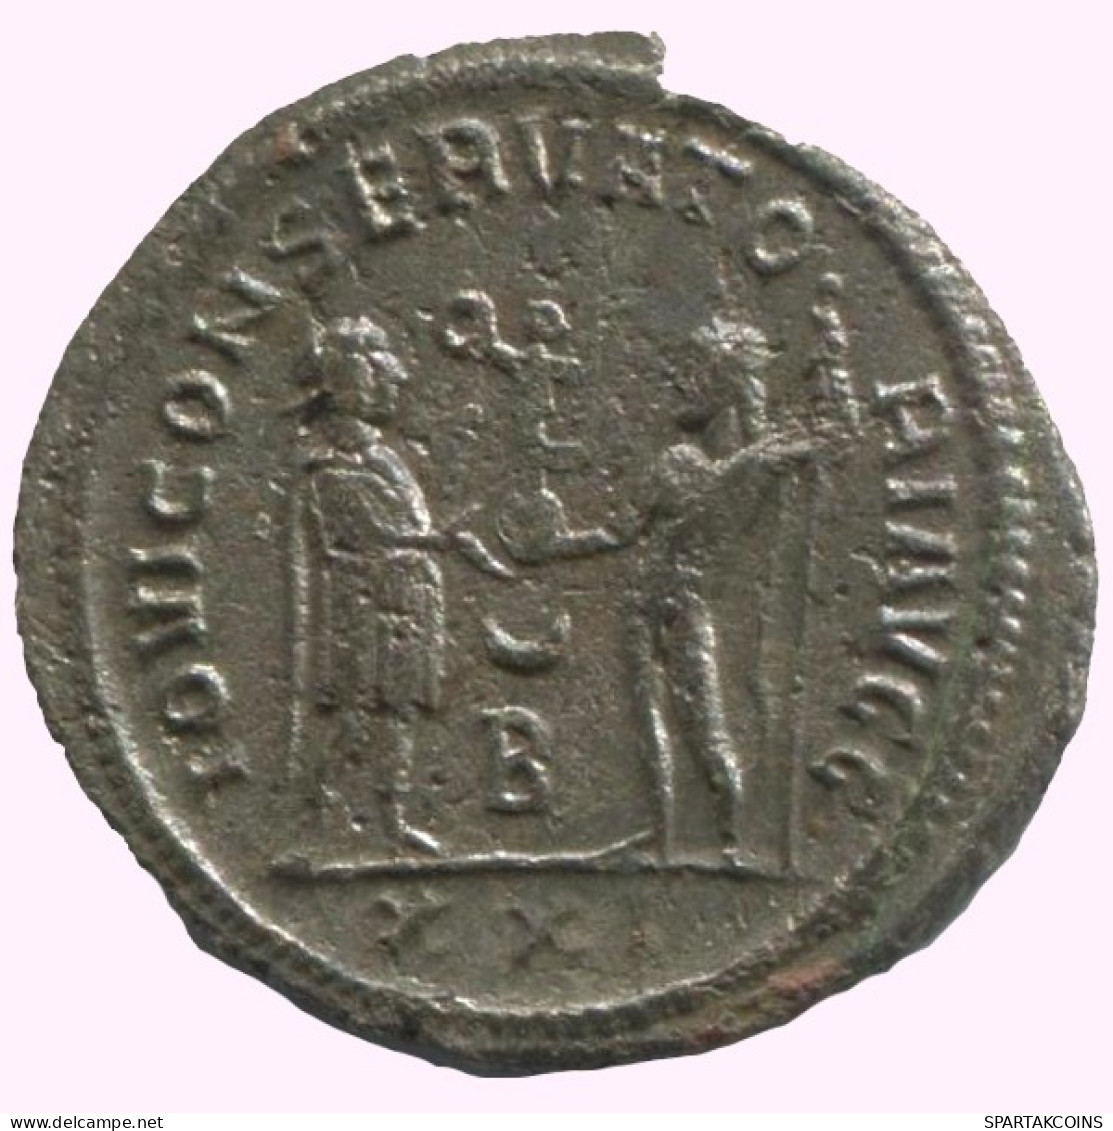 DIOCLETIAN ANTONINIANUS Antioch (? B/XXI) AD293 IOVI CONSERVAT AVGG #ANT1927..E.A - The Tetrarchy (284 AD Tot 307 AD)